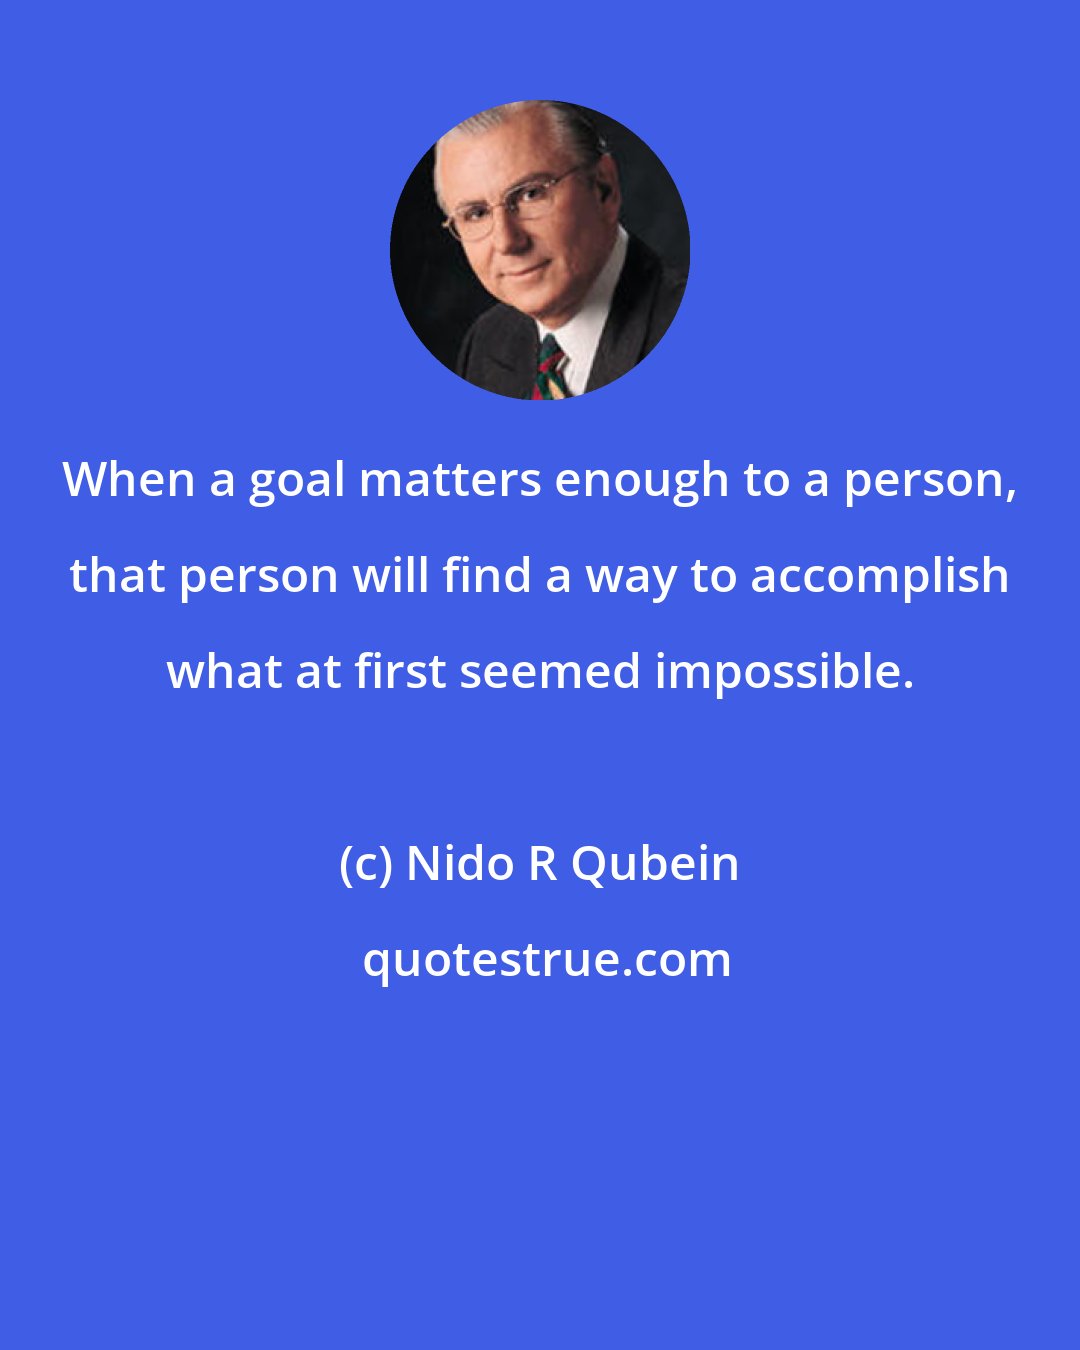 Nido R Qubein: When a goal matters enough to a person, that person will find a way to accomplish what at first seemed impossible.